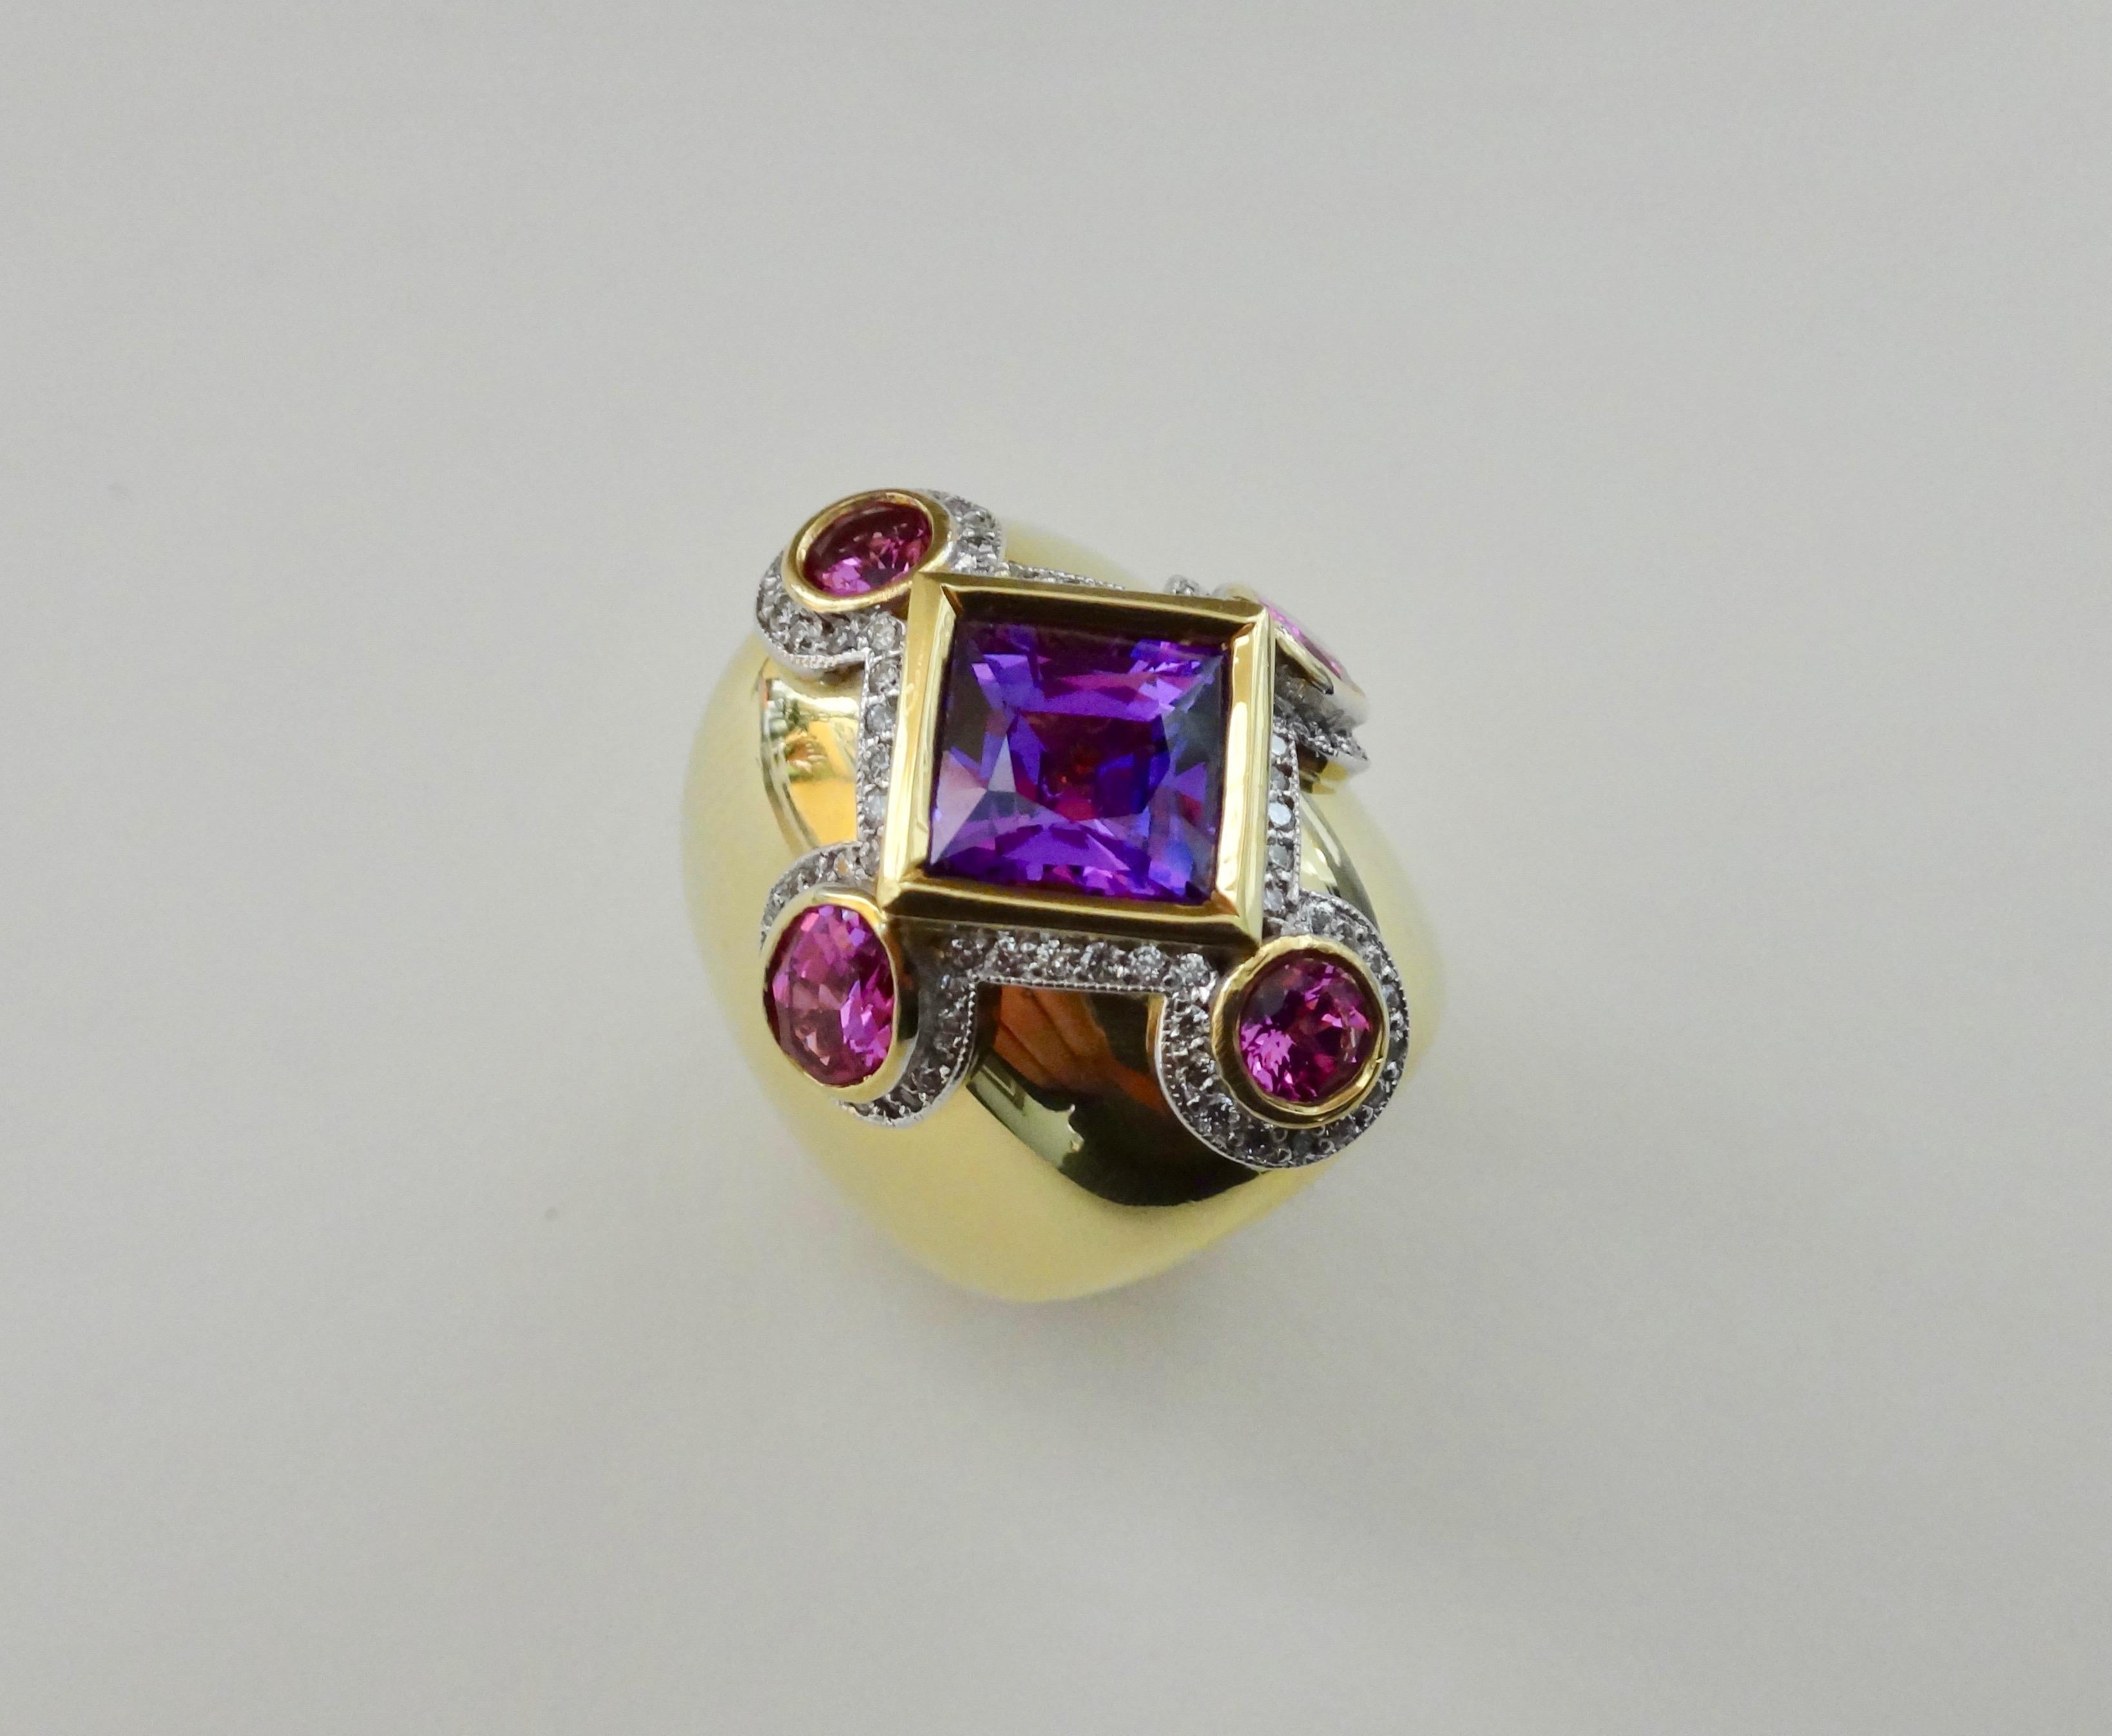 Contemporary Michael Kneebone Purple Spinel Pink Spinel Pave Diamond Dome Ring